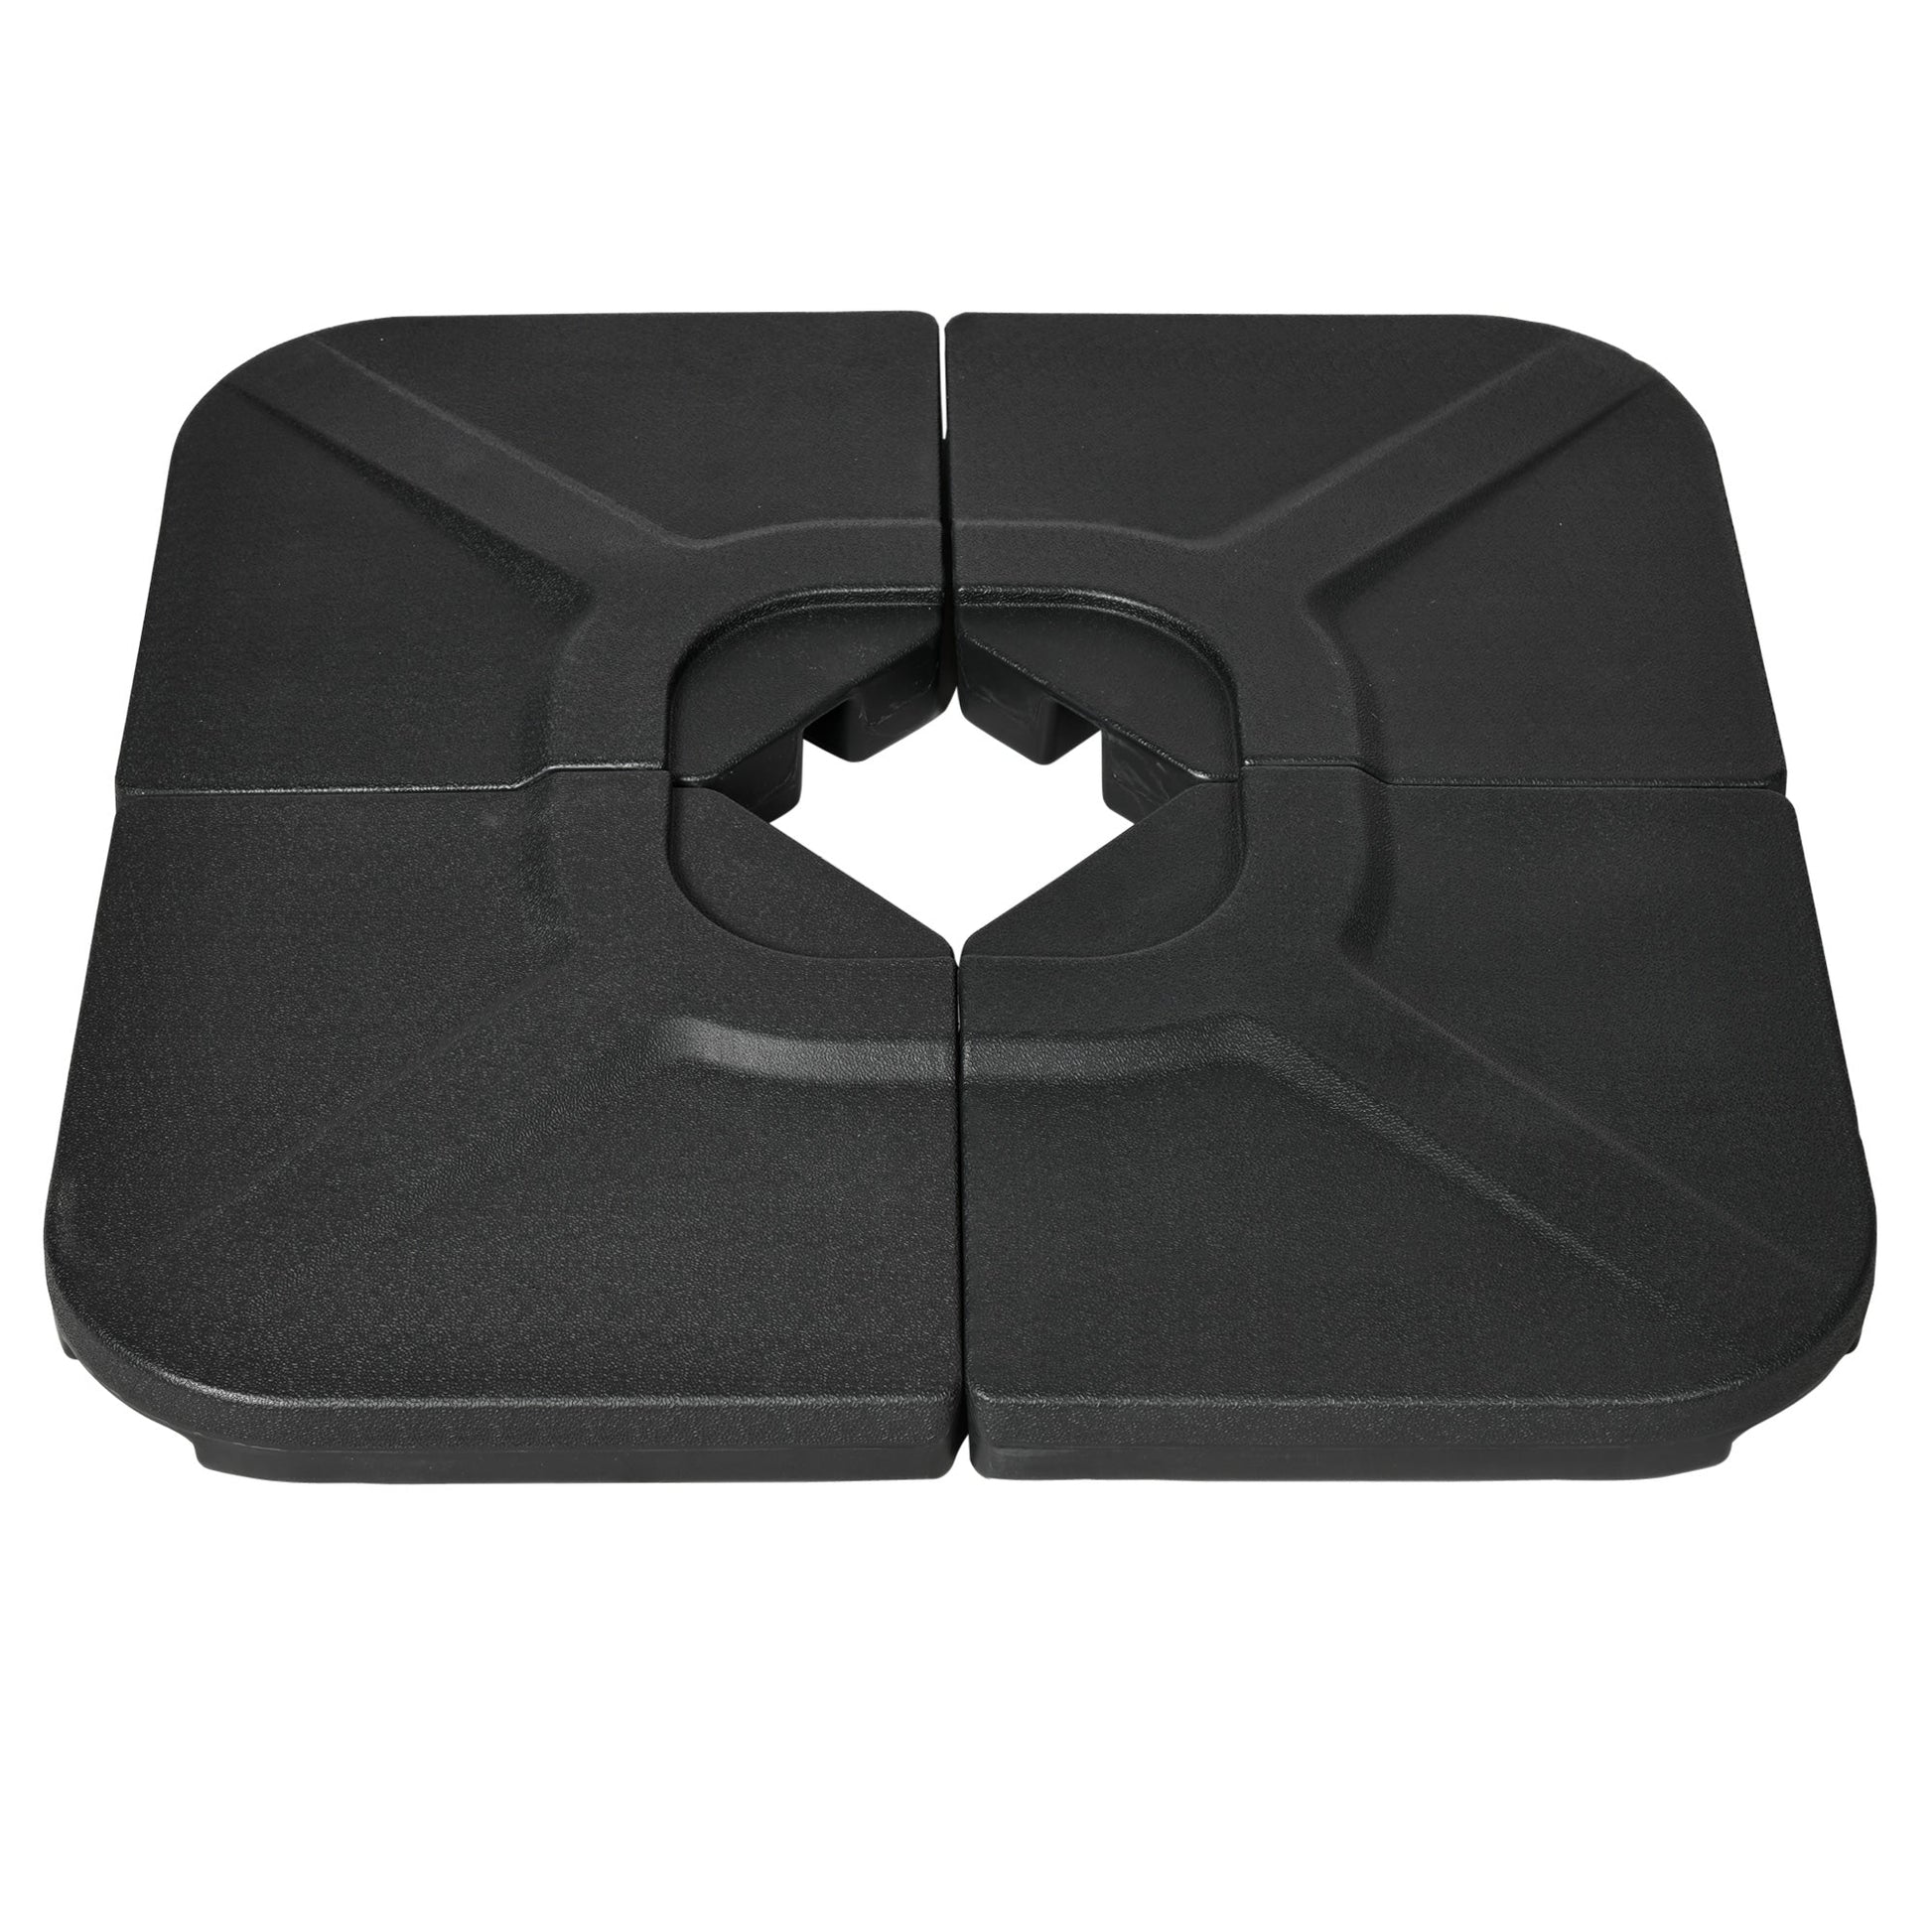 4 Pieces Patio Umbrella Base Weights, HDPE Water or Sand Filled Umbrella Weights for Cross Base Stand, Black at Gallery Canada